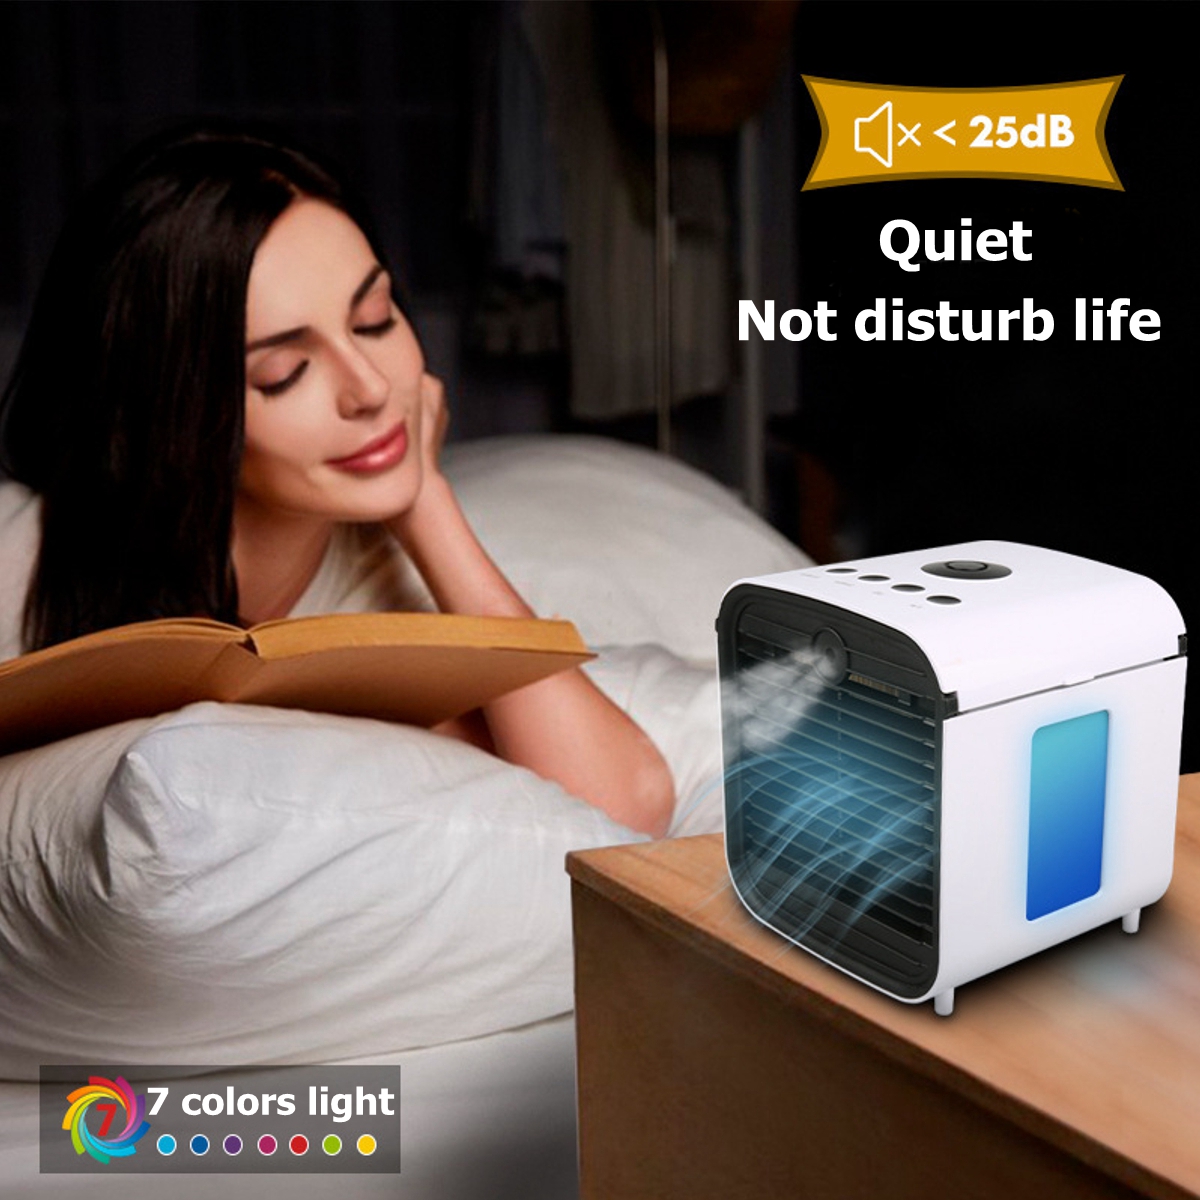 Lithum Battery Air Conditioner Fan 3 Speed Small Personal USB Air Cooler Indoor&Outdoor Use 2 Hours Mini Air Aromatherapy Desk Fan Cooling 